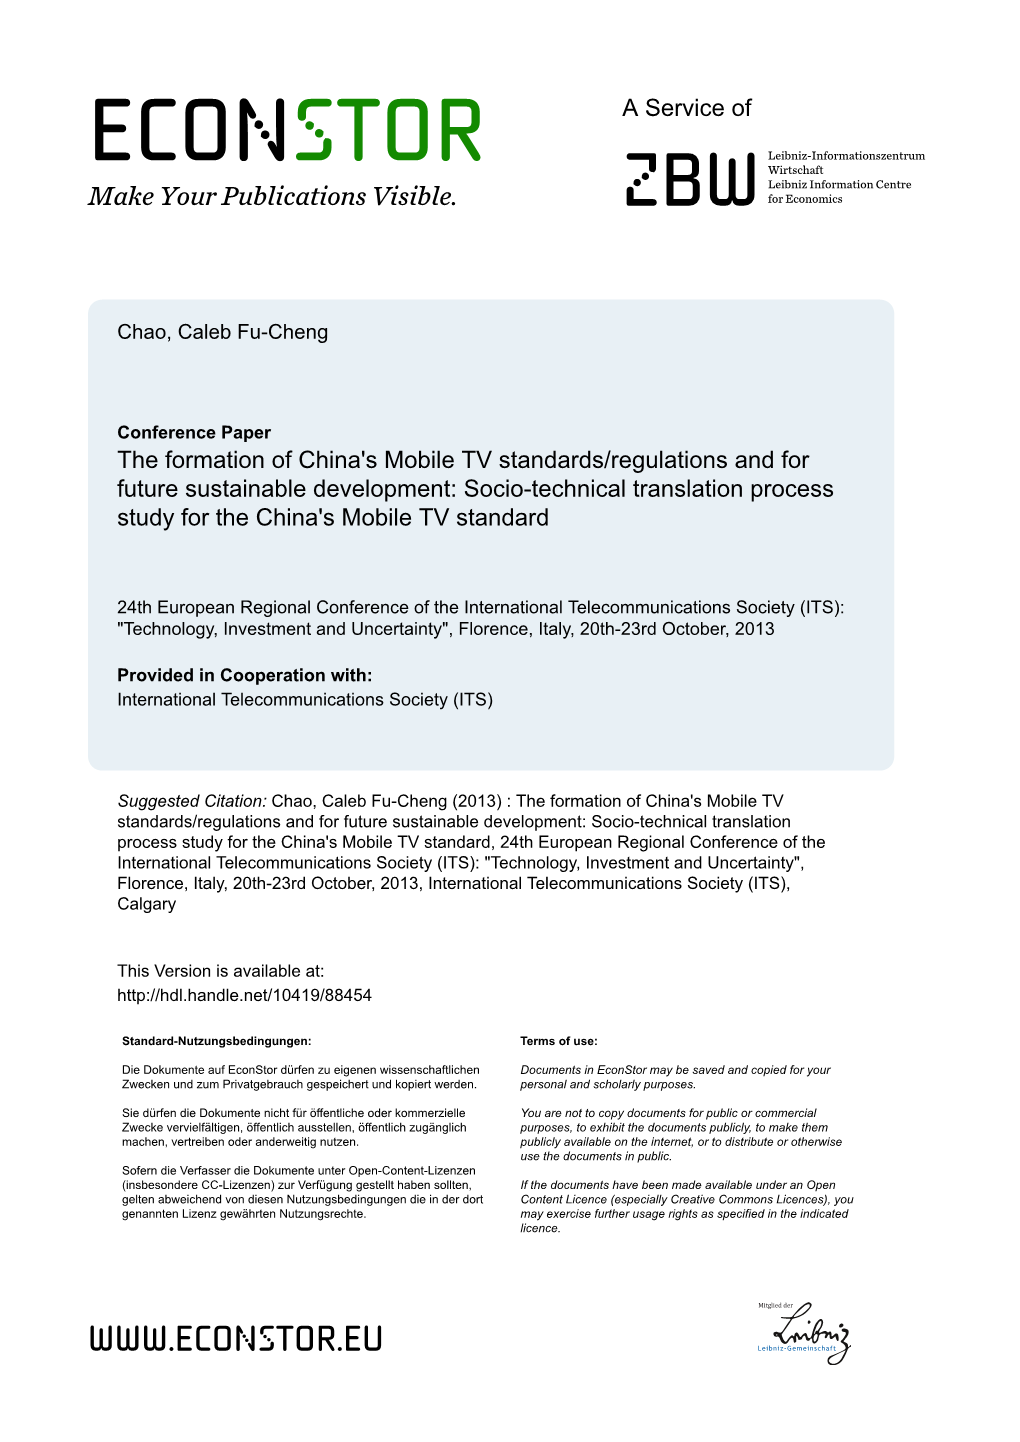 The Formation of China's Mobile TV Standards/Regulations